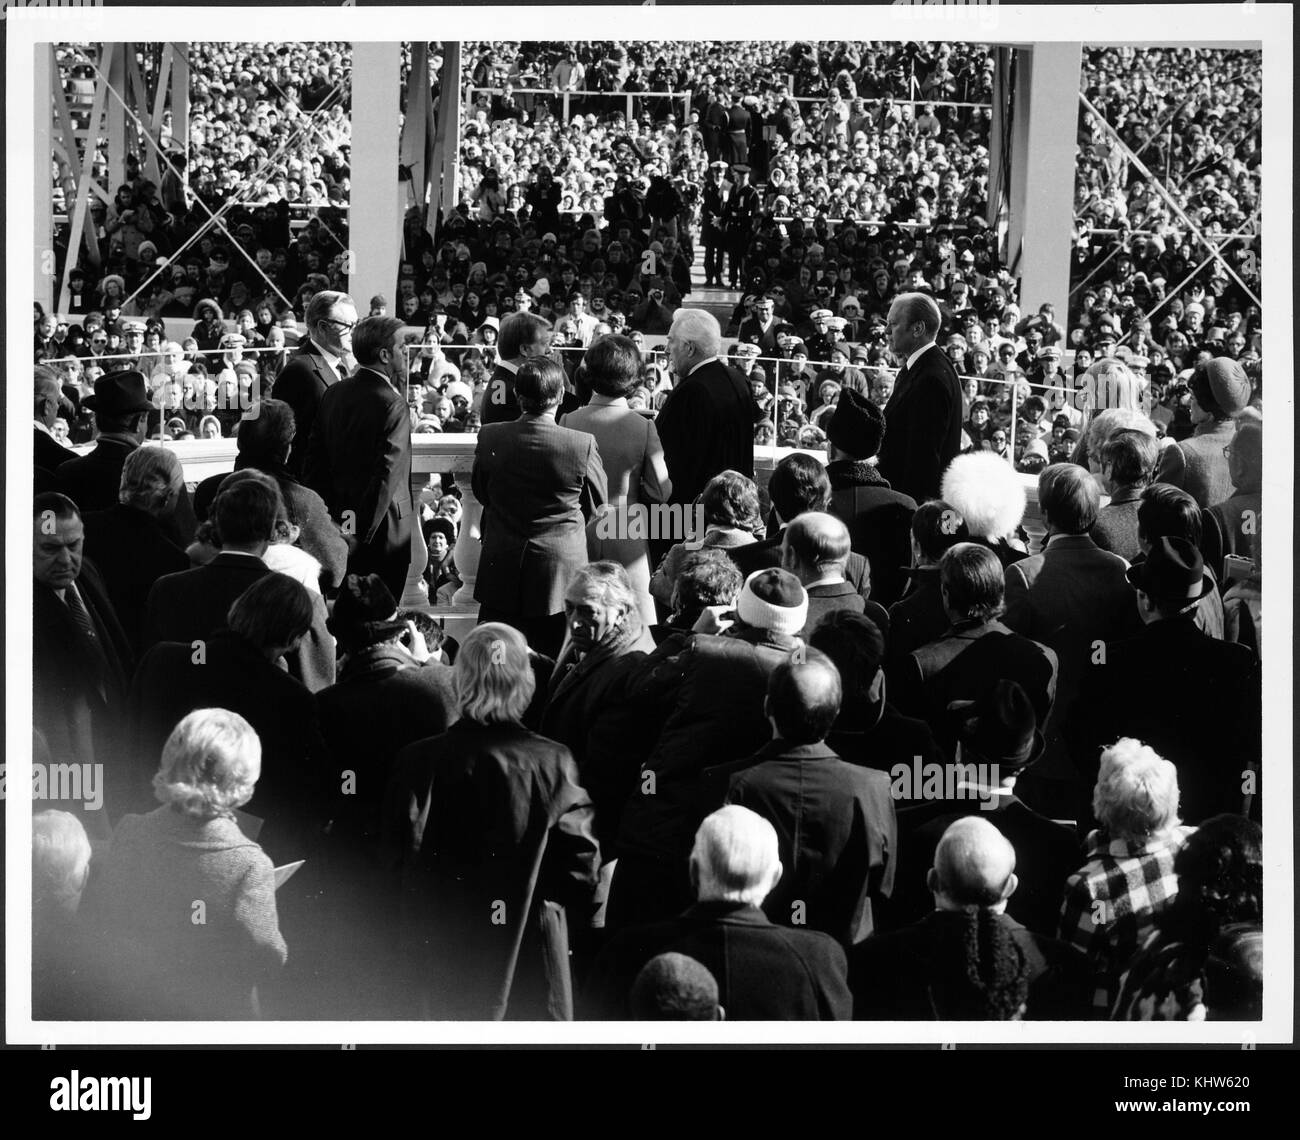 Photograph taken during the inauguration of President Jimmy Carter. Jimmy Carter (1924-) an American politician who served as the 39th President of the United States. Dated 20th Century Stock Photo